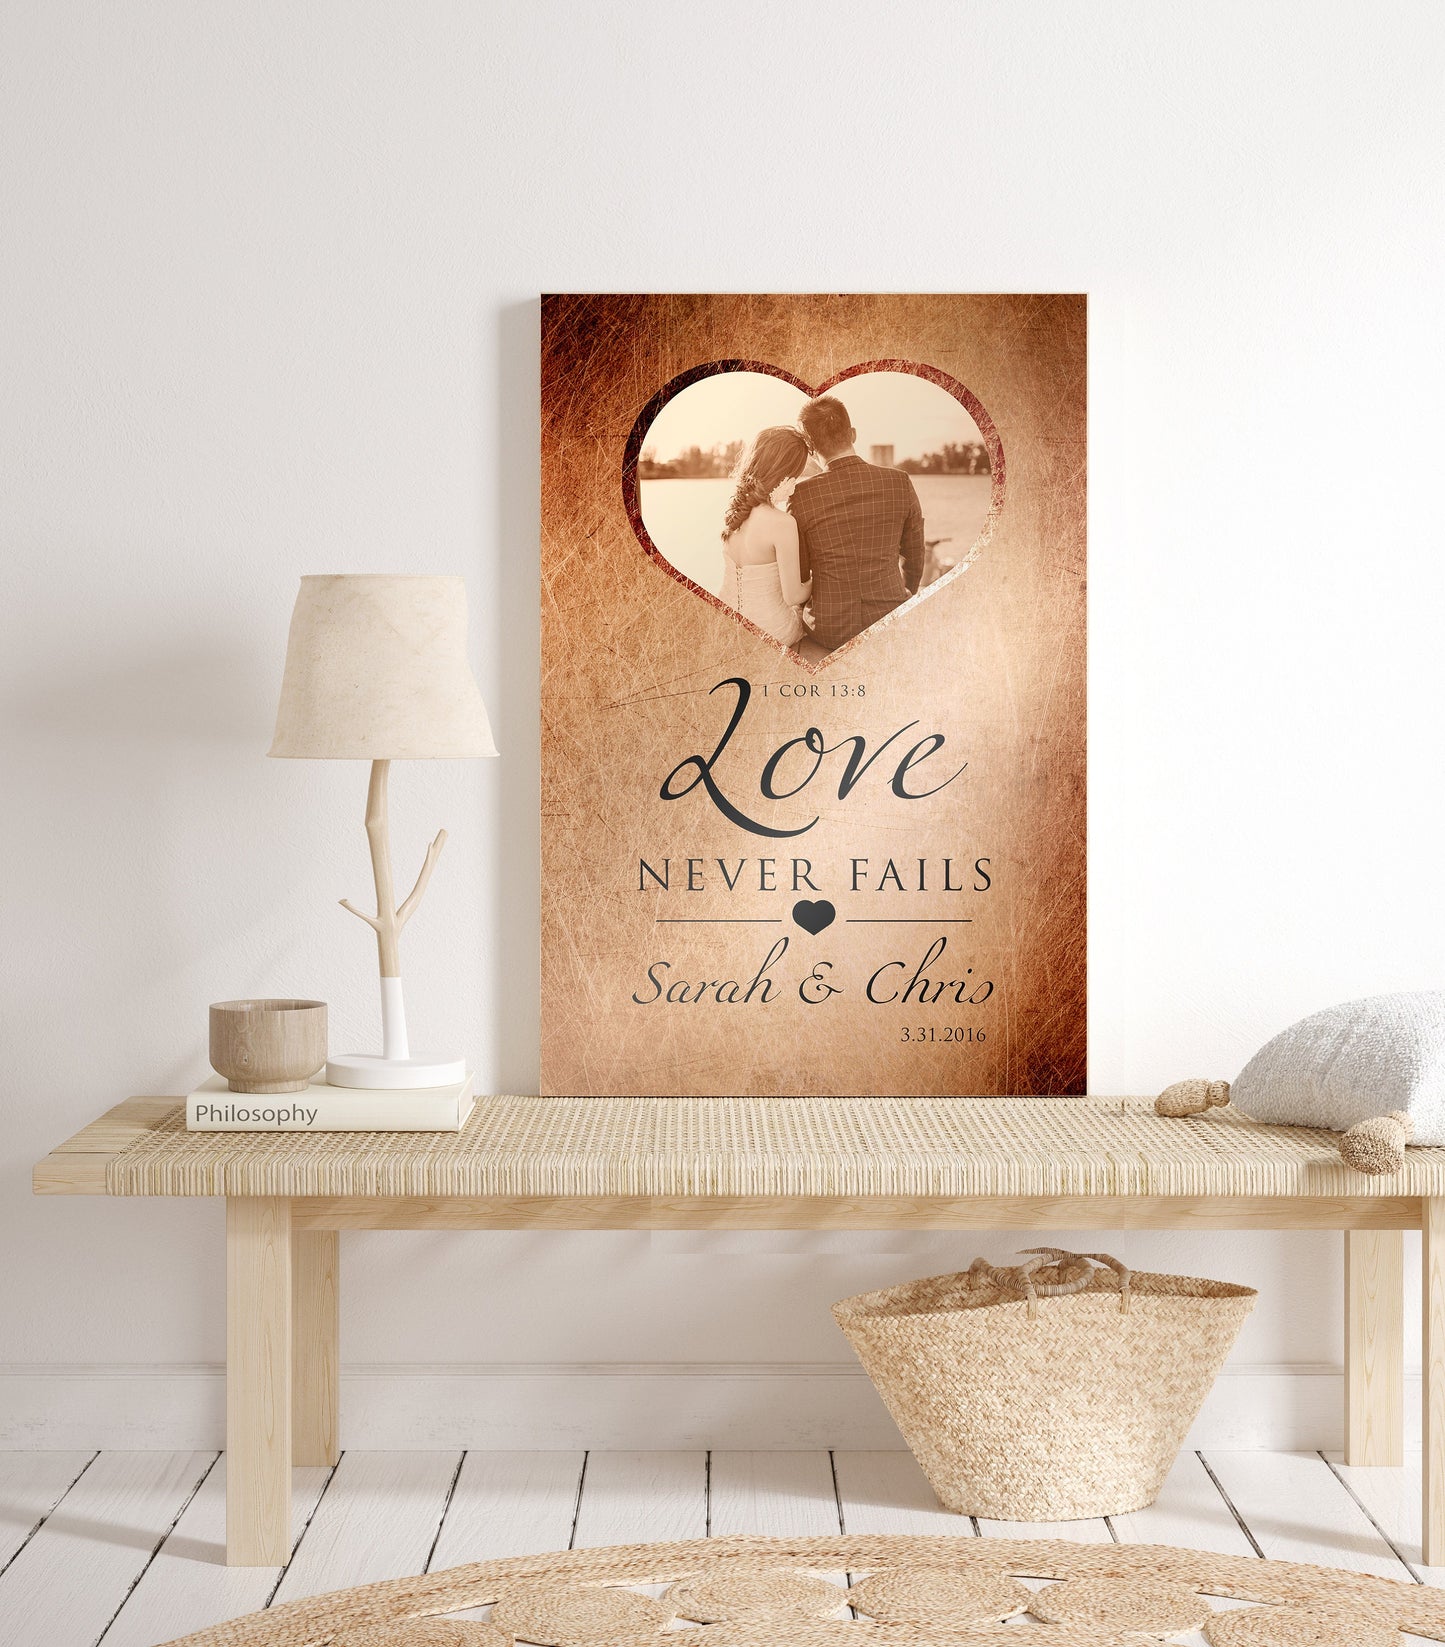 
                  
                    Love Never Fails Photo Sign, Personalized Anniversary plaque, 1 Cor 13 Art, Custom Copper Gift, Heart framed photo, Est Sign for couple
                  
                